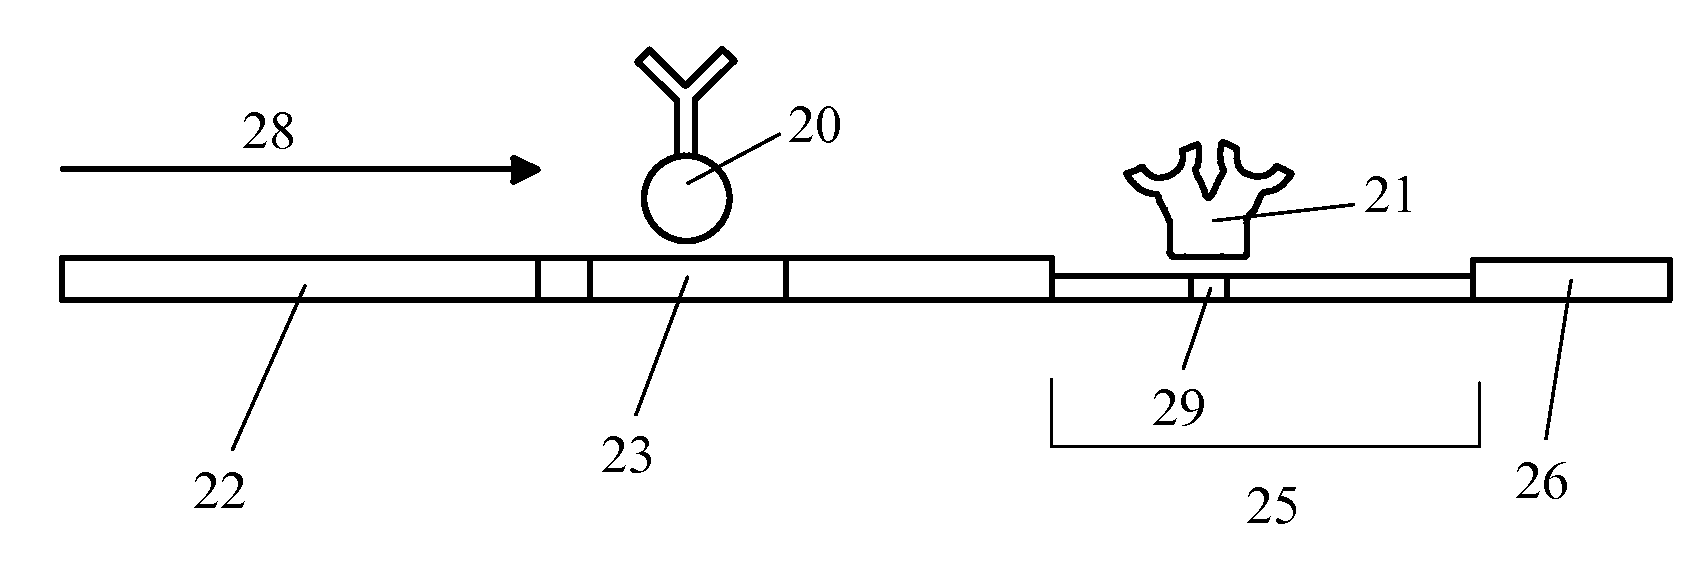 Method to increase specificity and/or accuracy of lateral flow immunoassays